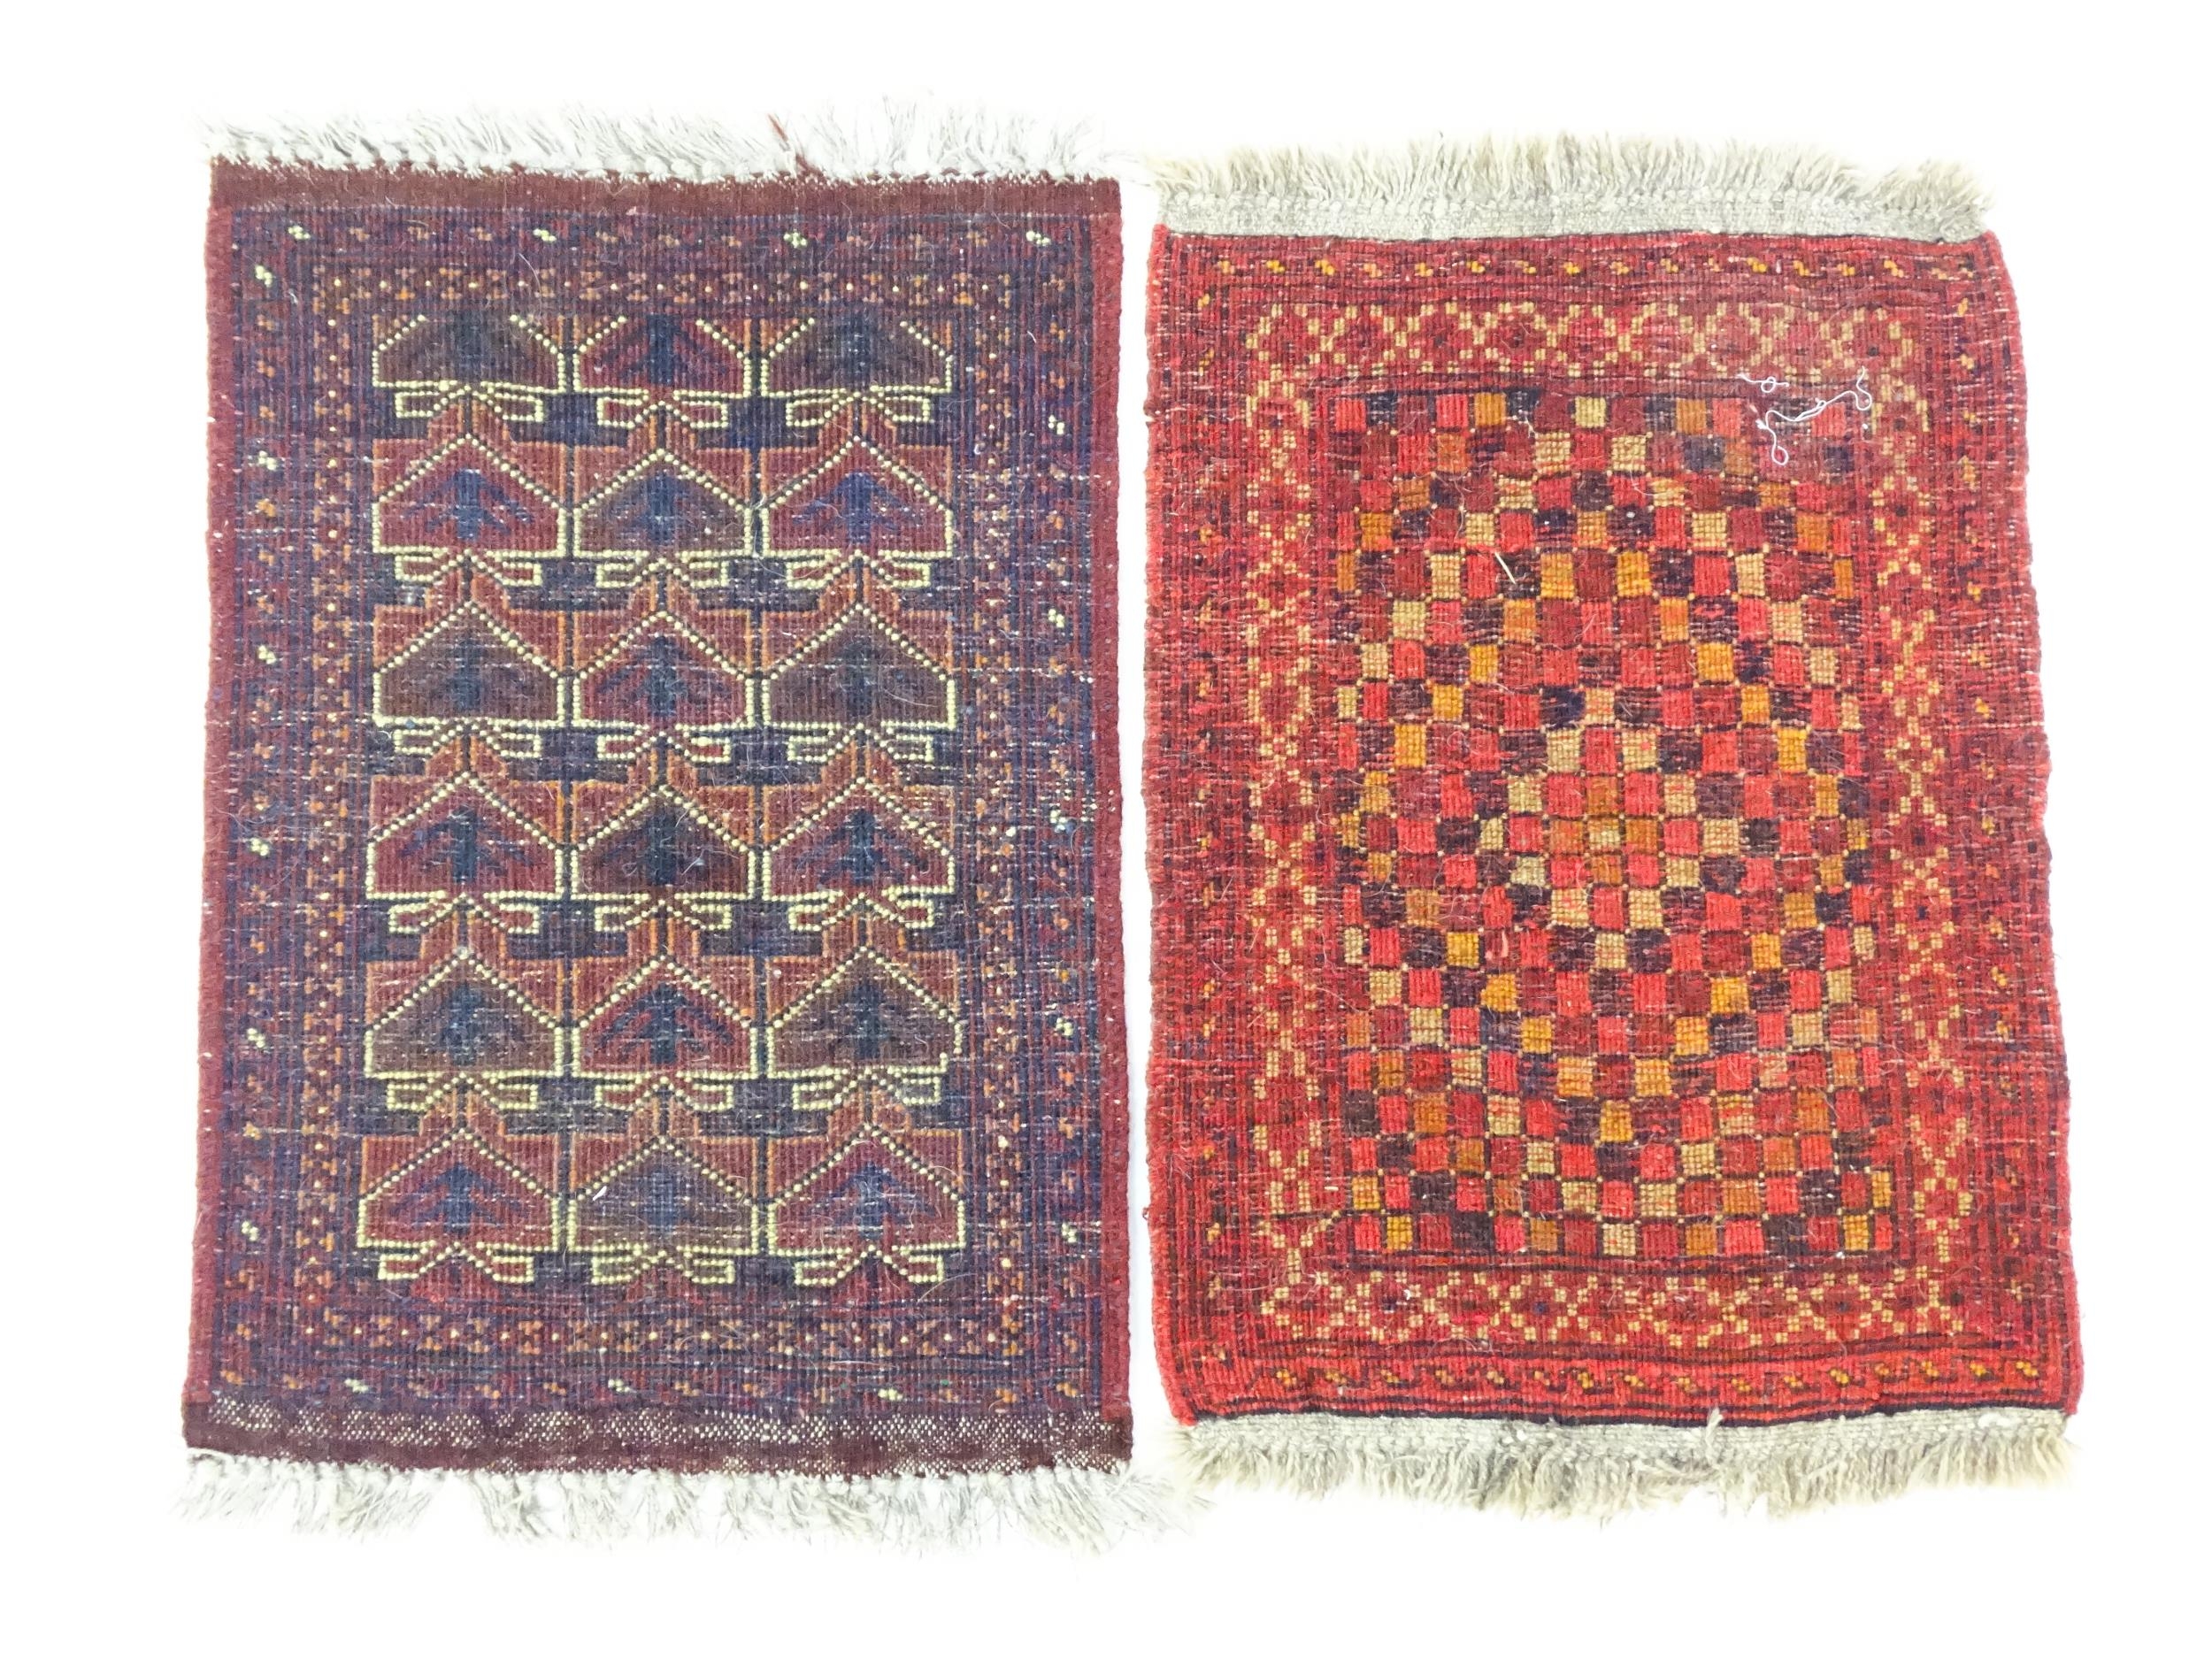 Carpets / Rugs: Two small rugs, one with burgundy ground with repeating motifs, the other with - Image 2 of 6